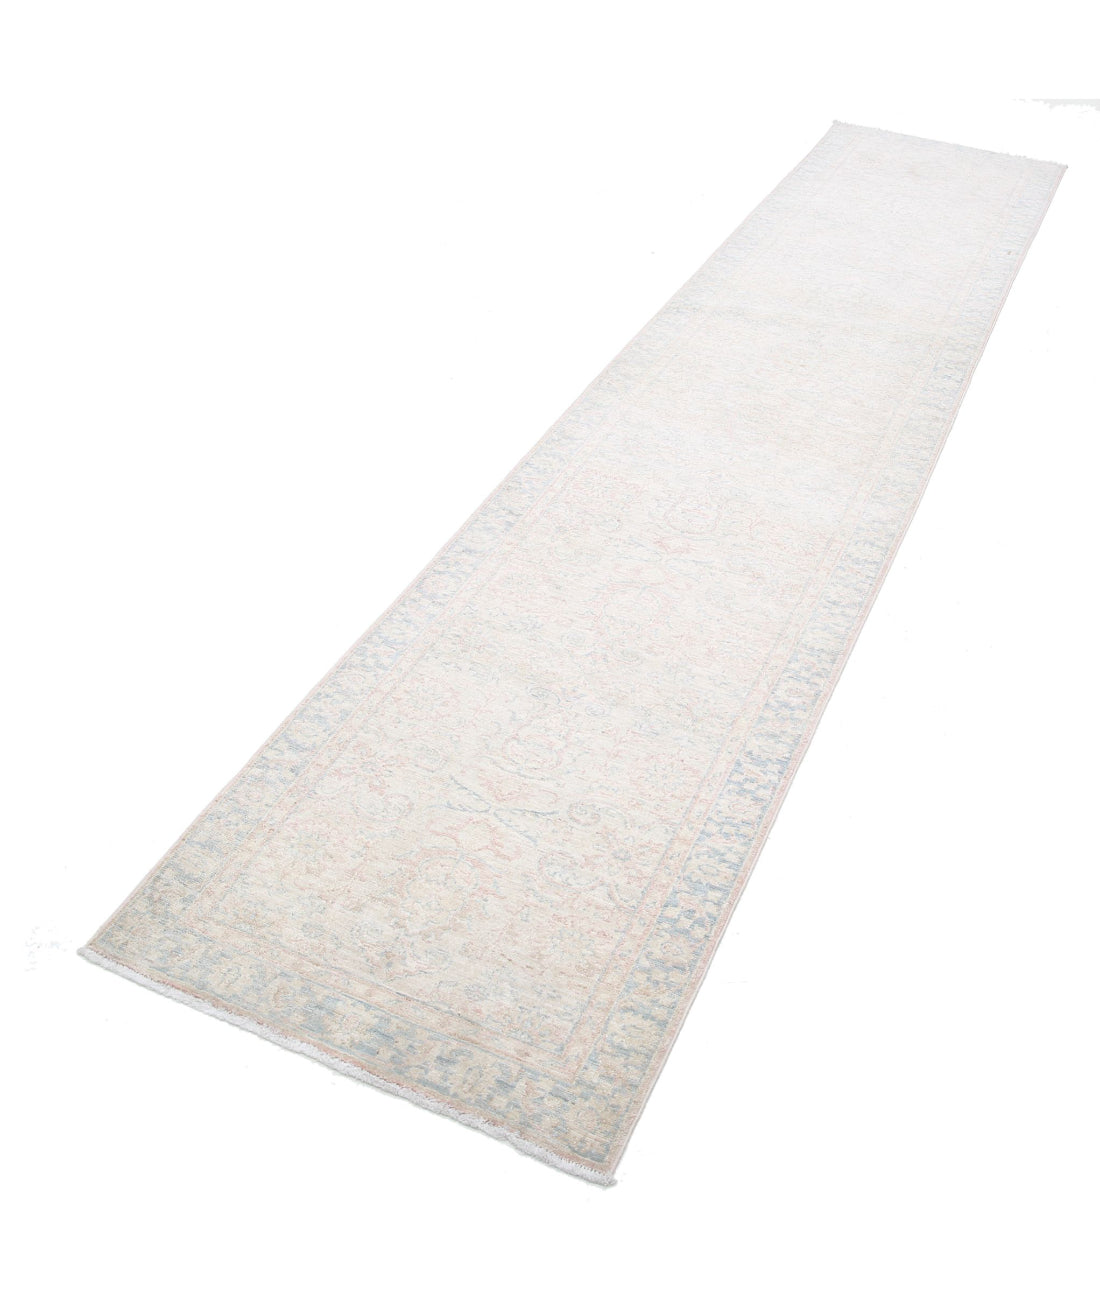 Serenity 2'5'' X 11'5'' Hand-Knotted Wool Rug 2'5'' x 11'5'' (73 X 343) / Ivory / Grey